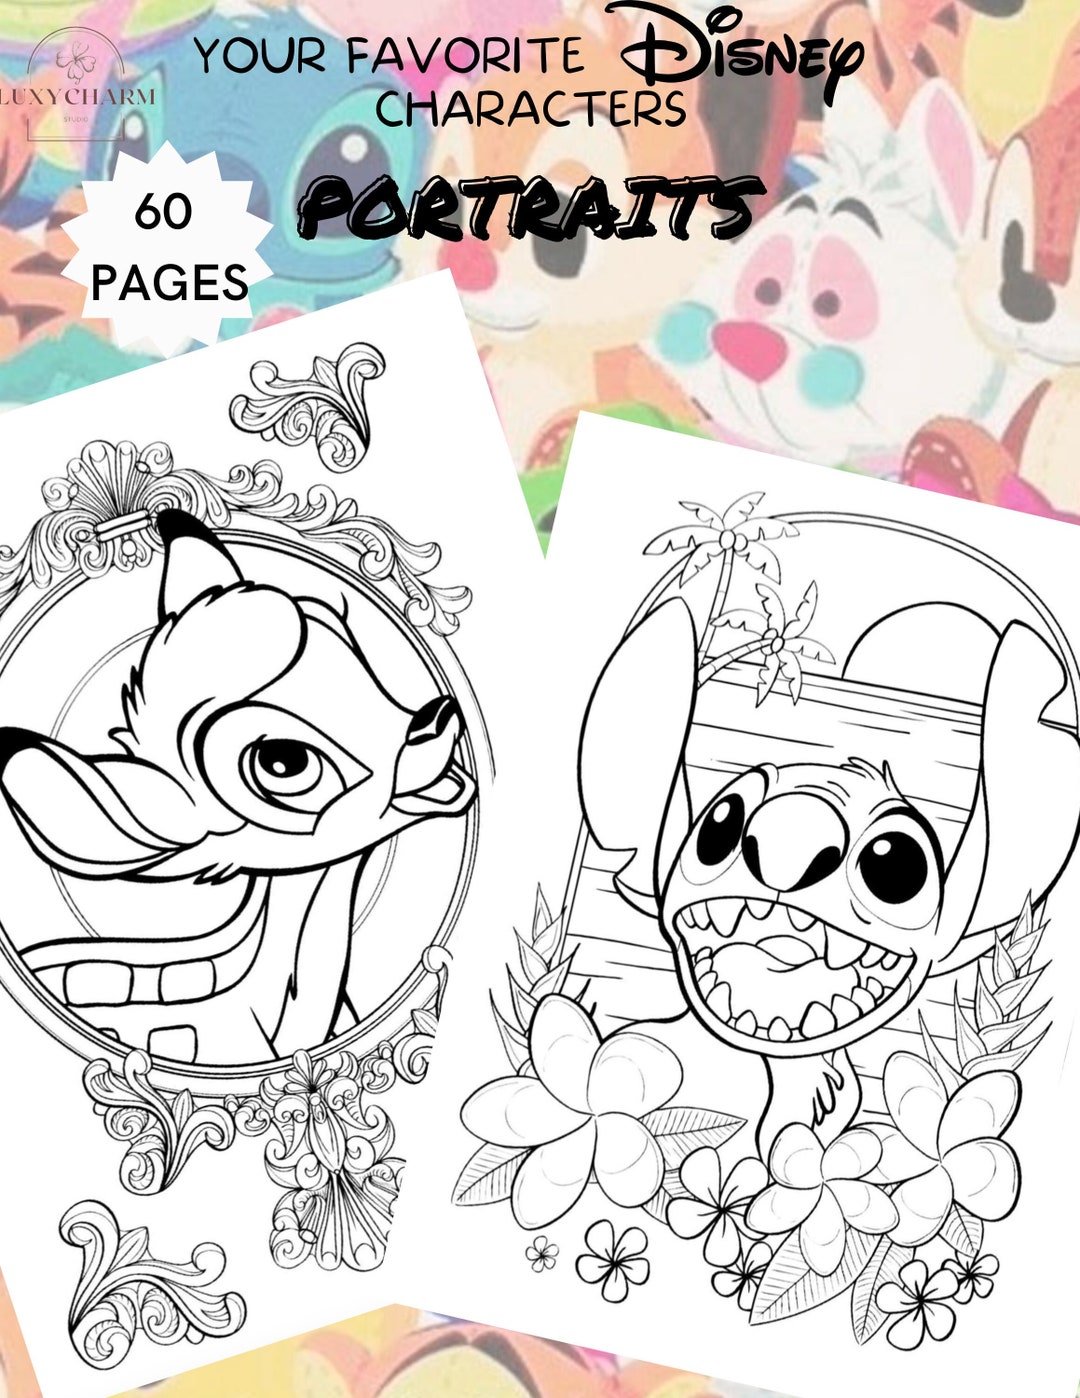 60 Pages PORTRAITS of Your Favorite Characters Coloring Book ...